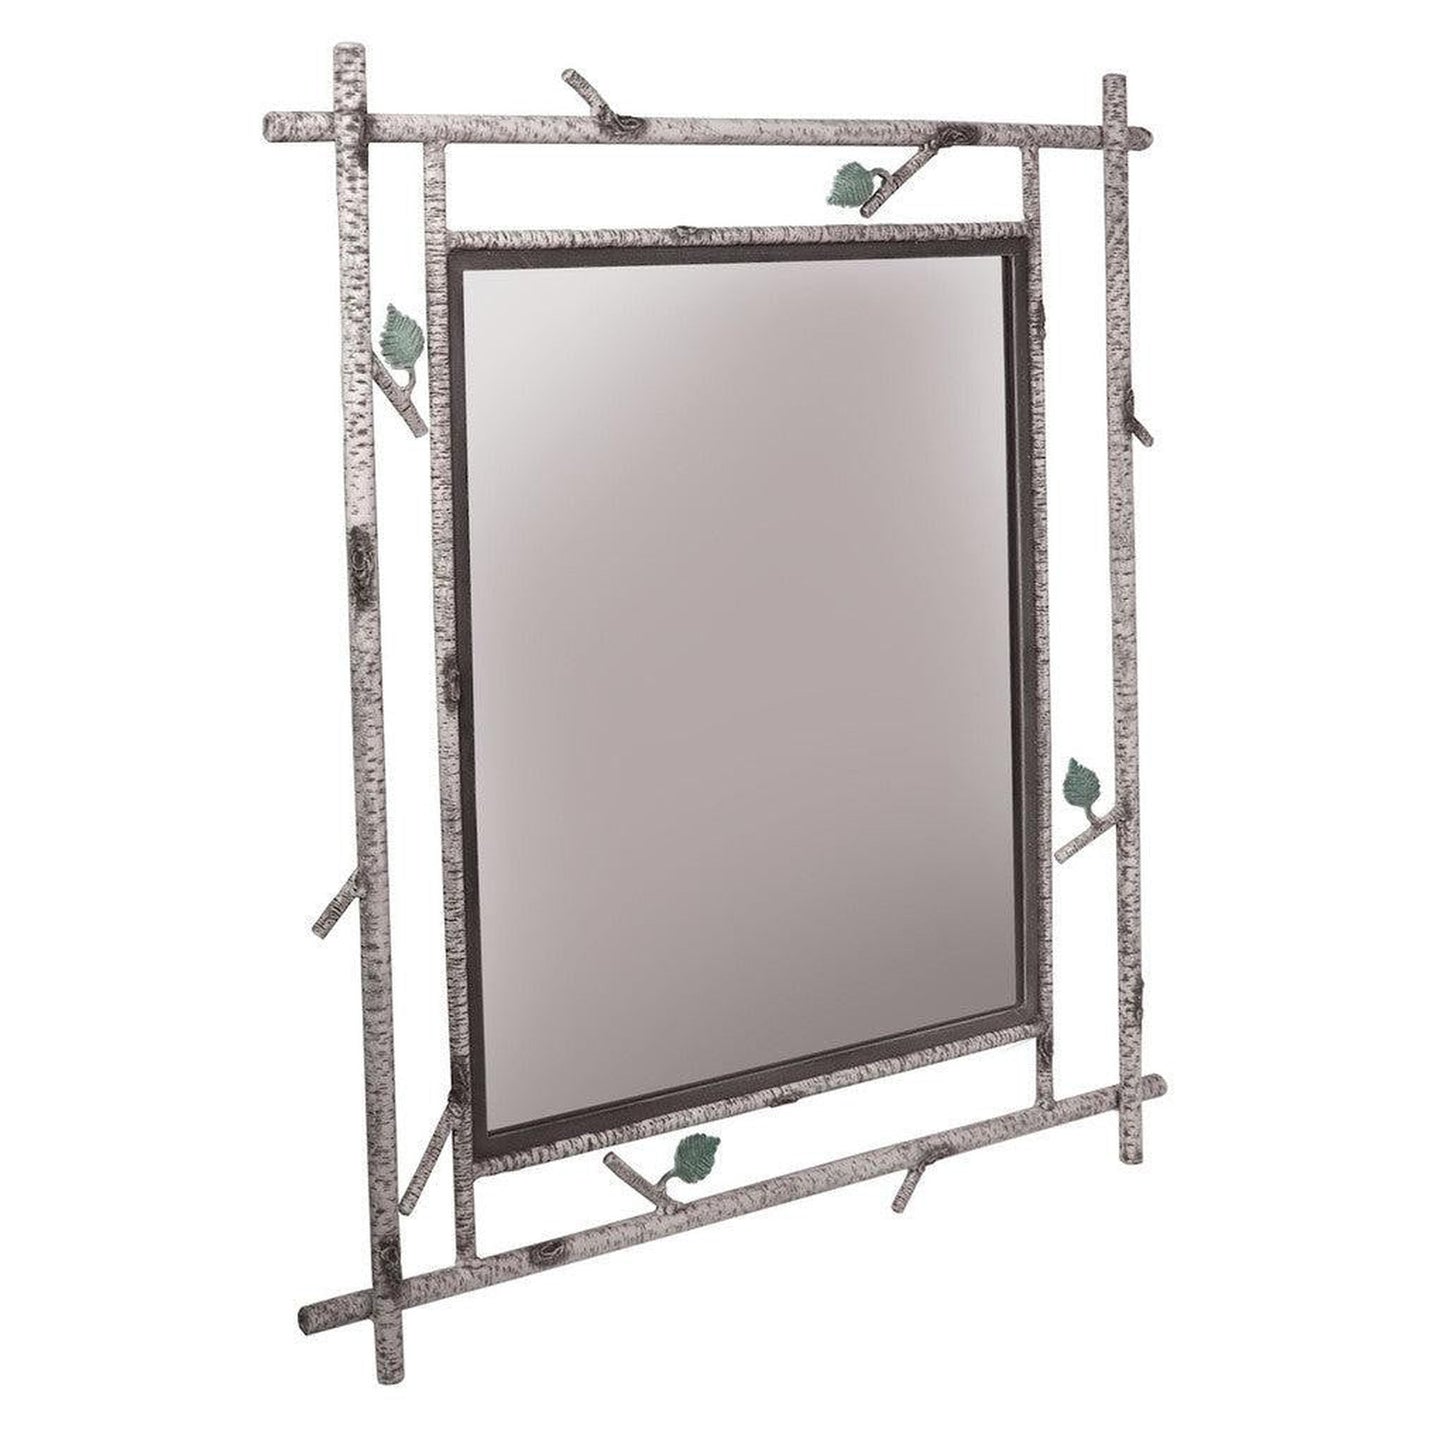 Stone County Ironworks Whisper Creek 35" x 47" Large Hand Rubbed Rust Iron Wall Mirror With Pewter Iron Accent